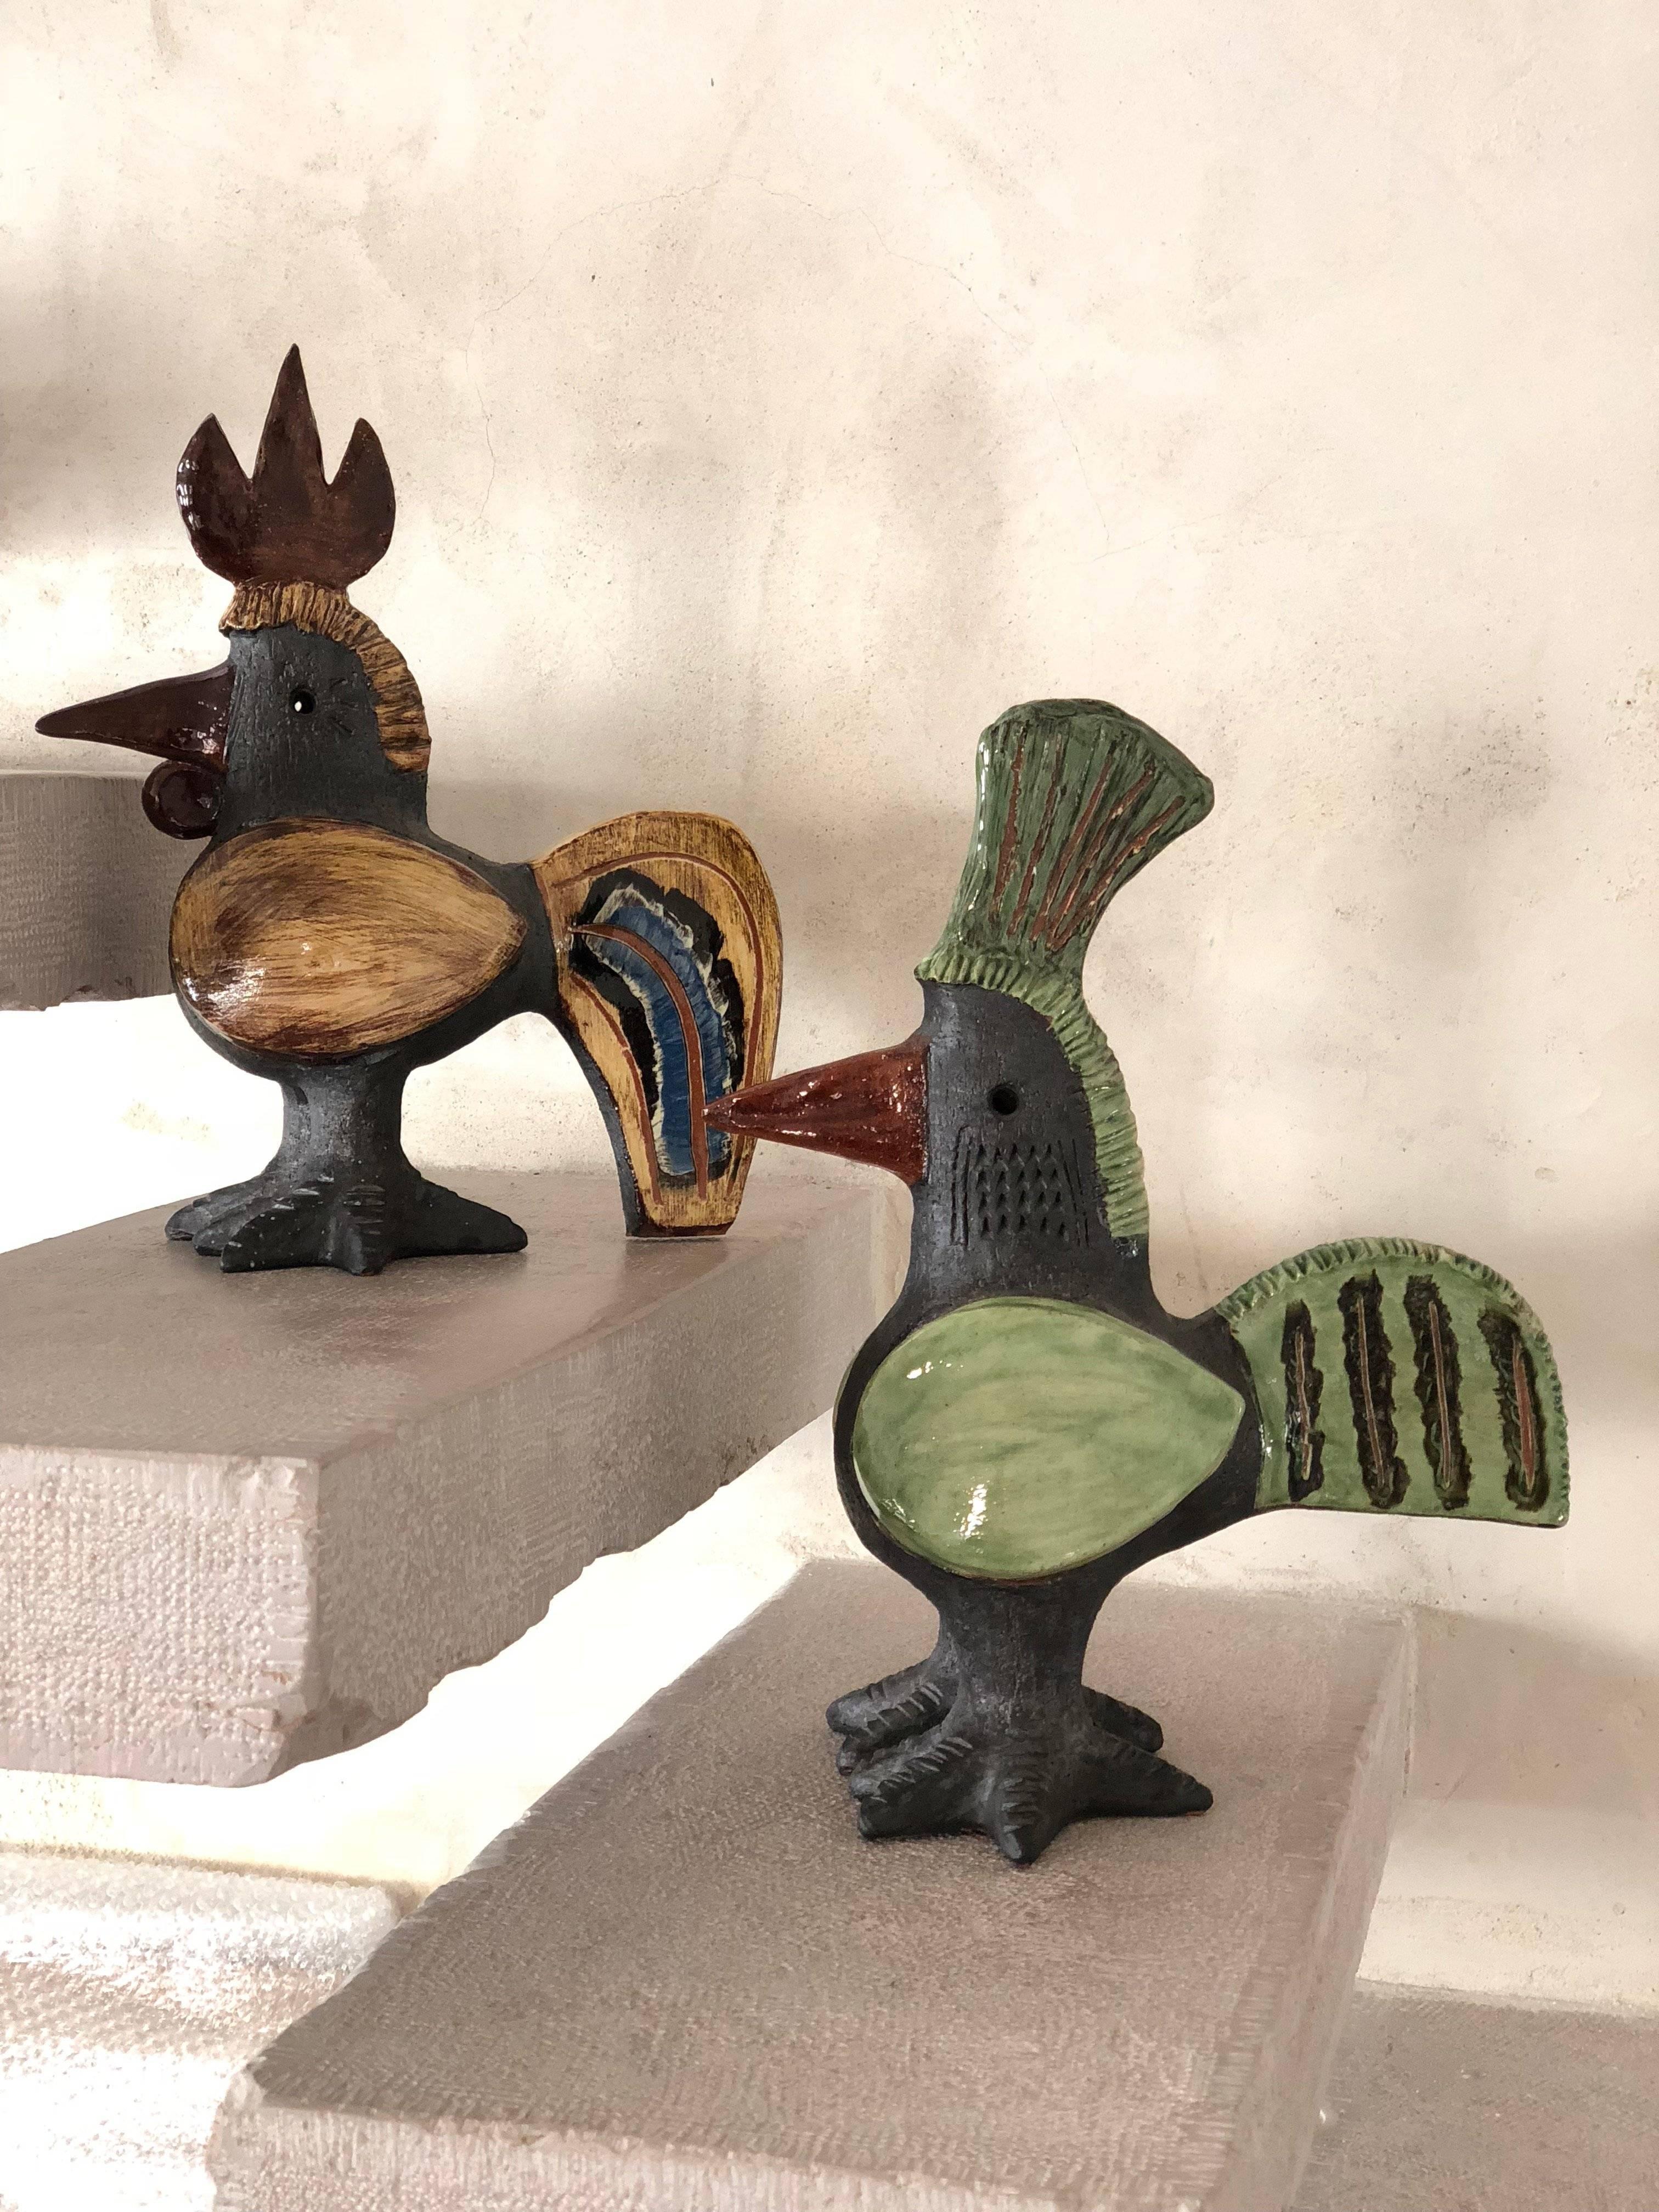 Modern Ceramic French Rooster Sculpture by Dominique Pouchain, circa 1990s